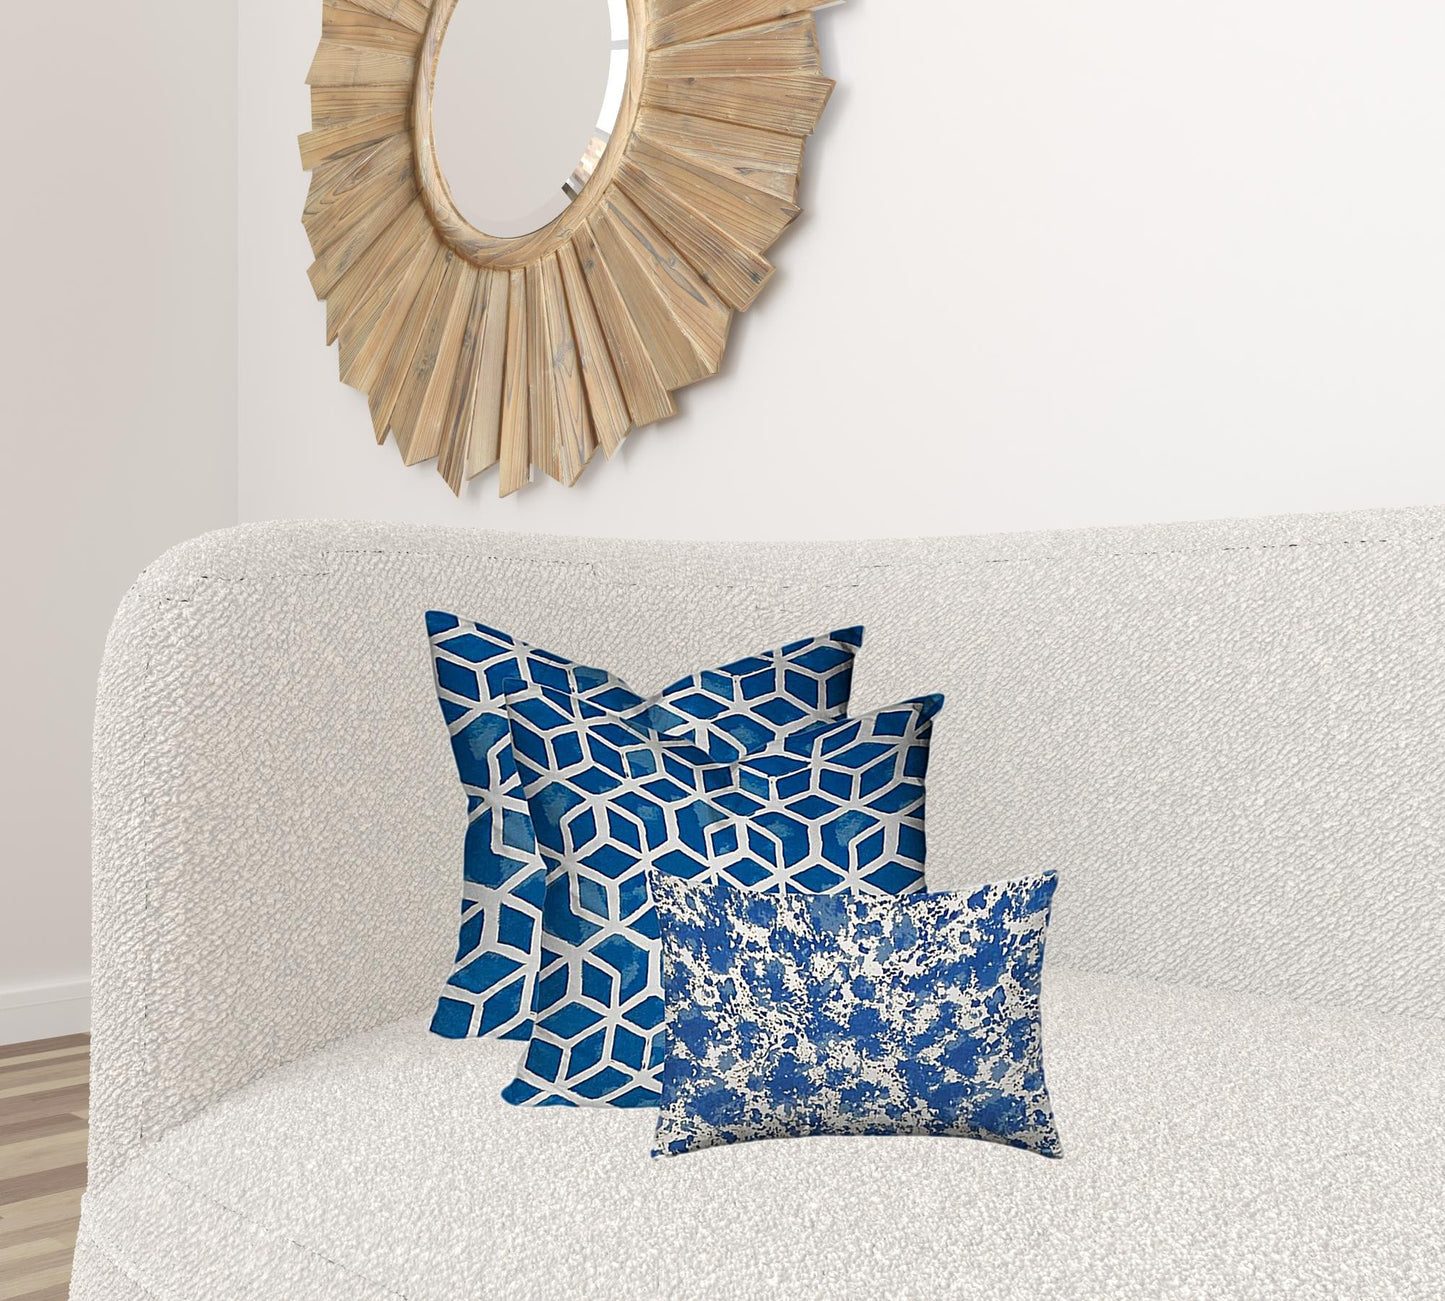 Set Of Three 20" X 20" Blue And White Enveloped Geometric Throw Indoor Outdoor Pillow Cover